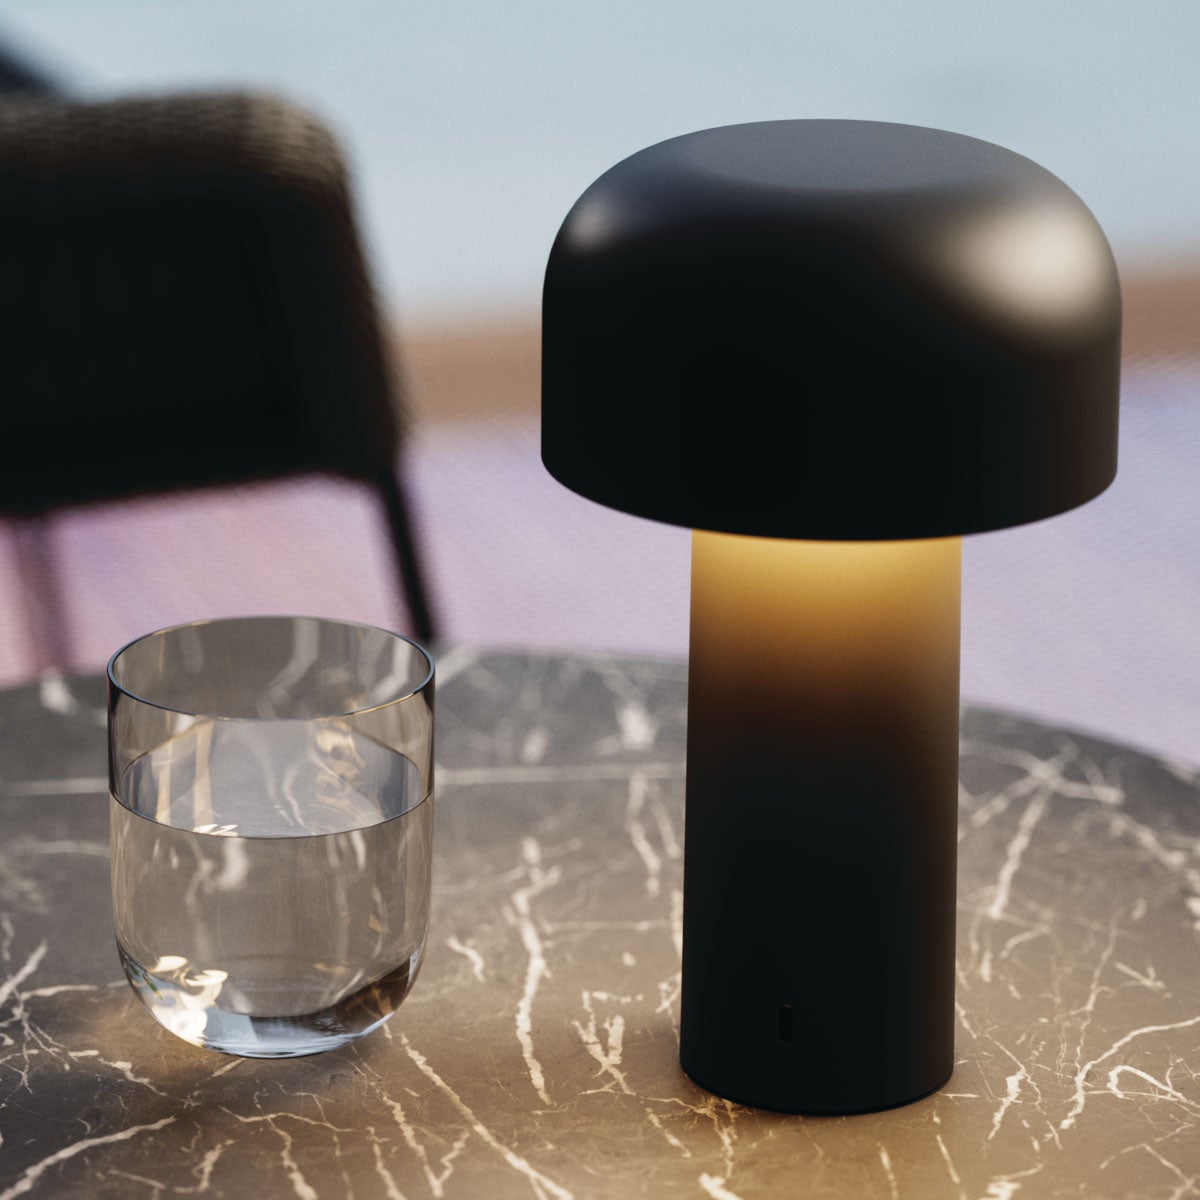 Bellhop Rechargeable LED Table Lamp, Matte Black by Edward Barber, Jay Osgerby for FLOS